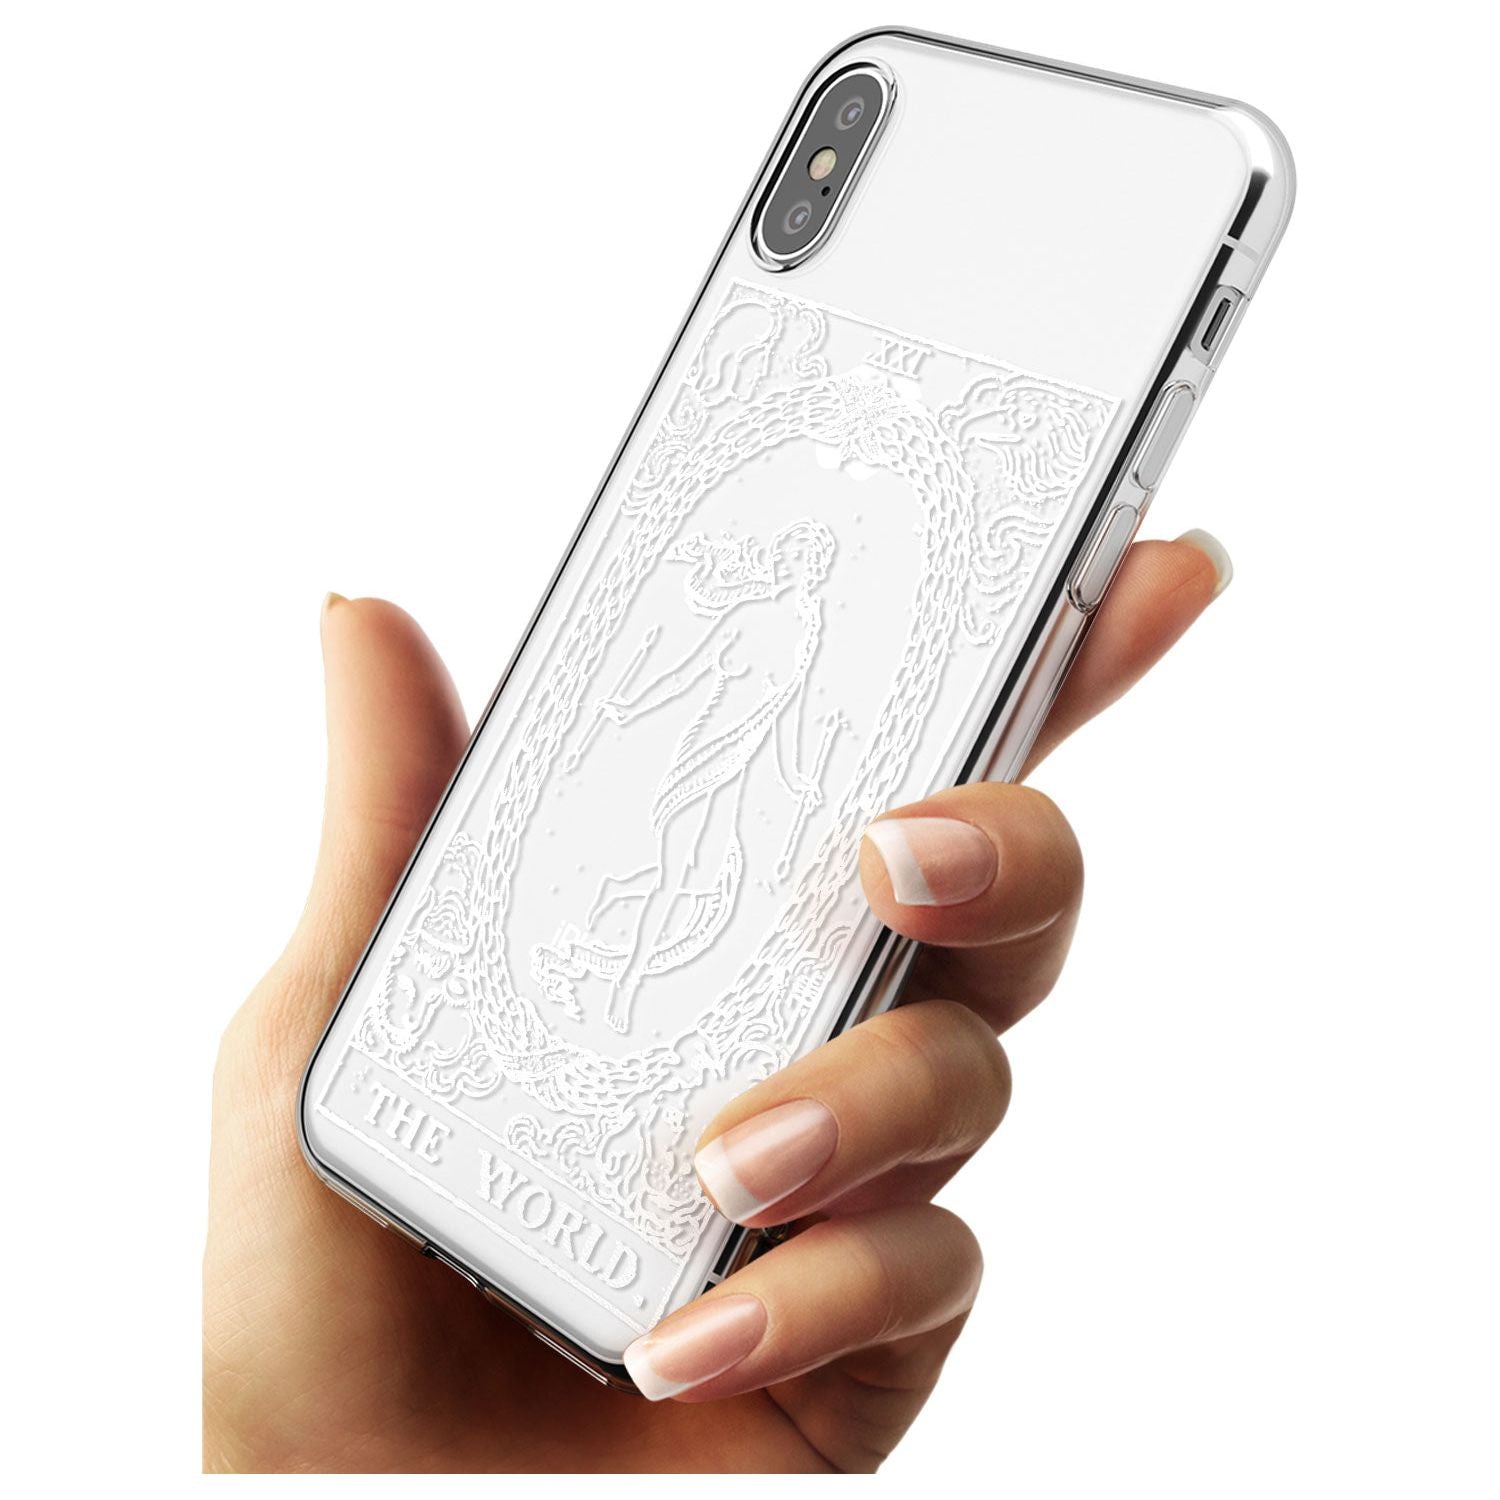 The World Tarot Card - White Transparent Black Impact Phone Case for iPhone X XS Max XR